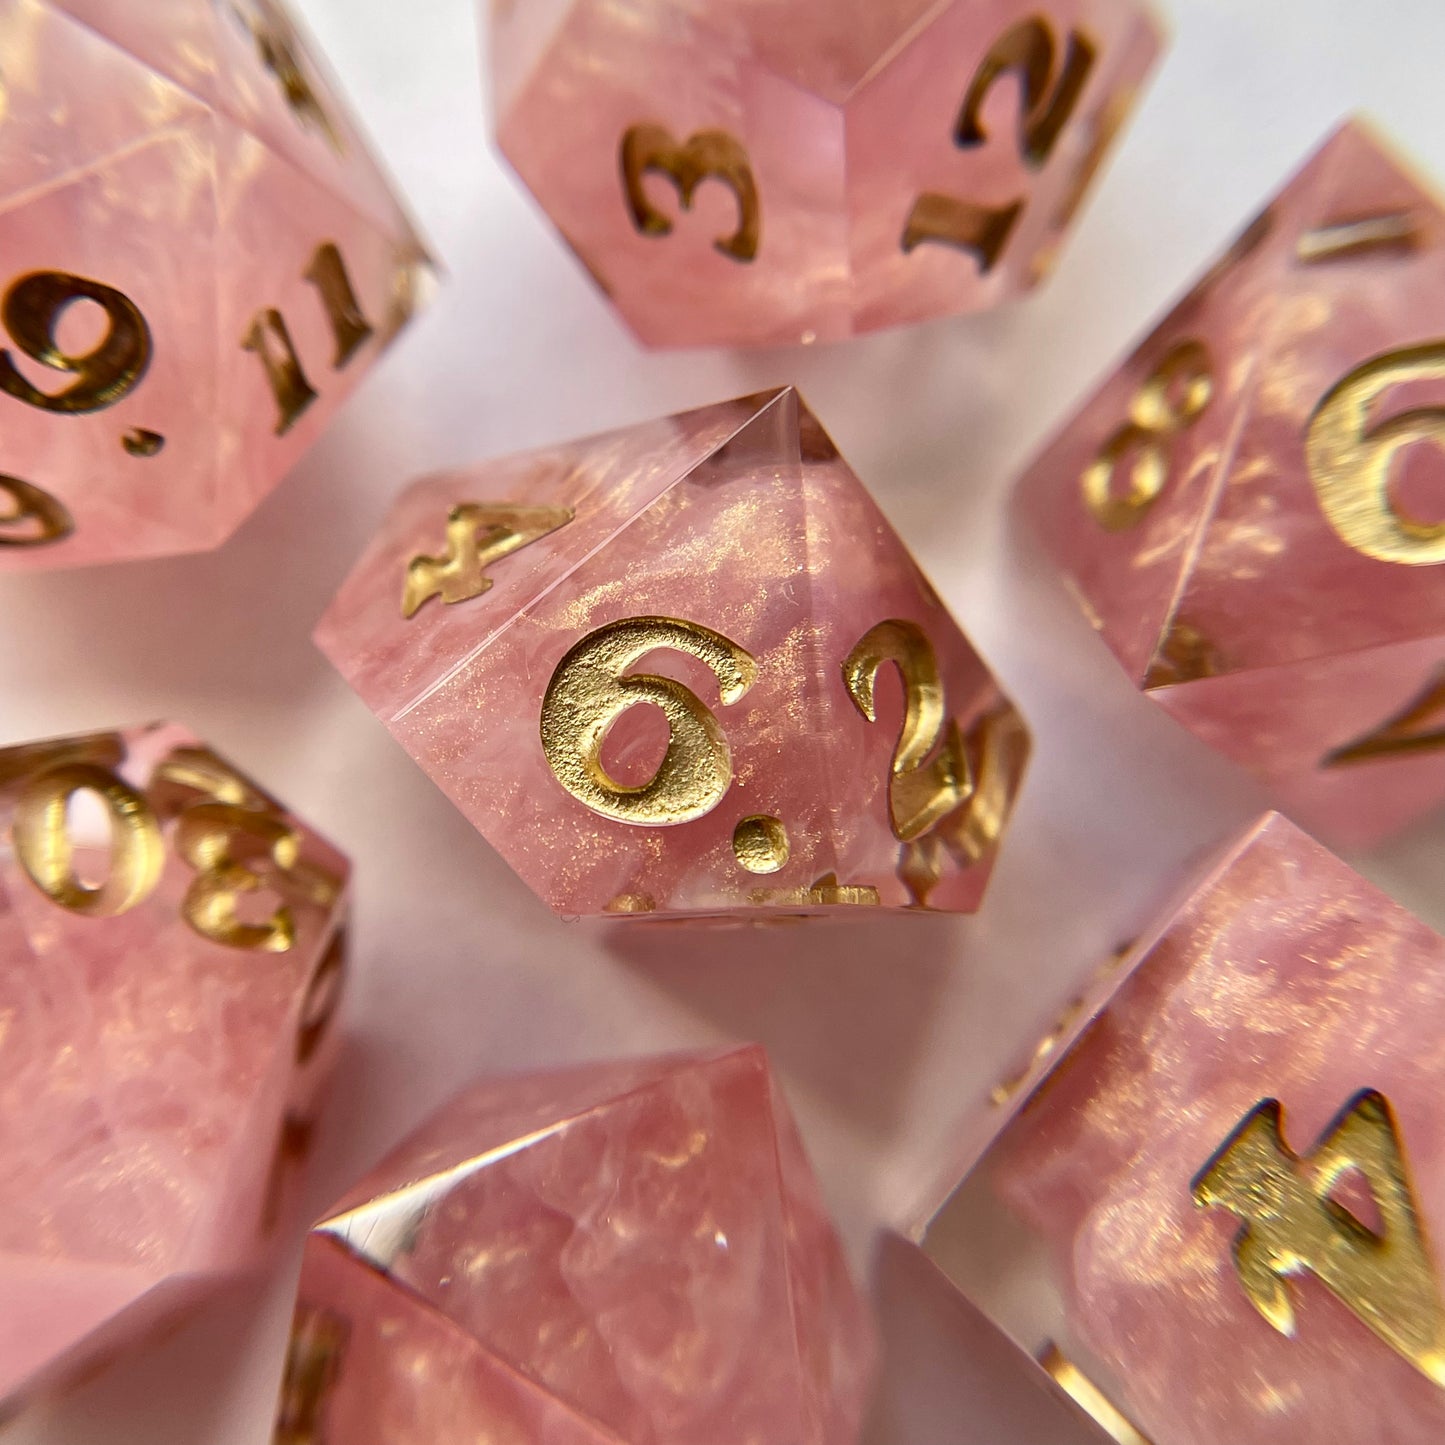 Augury (Variant) – 7-piece Polyhedral Dice Set